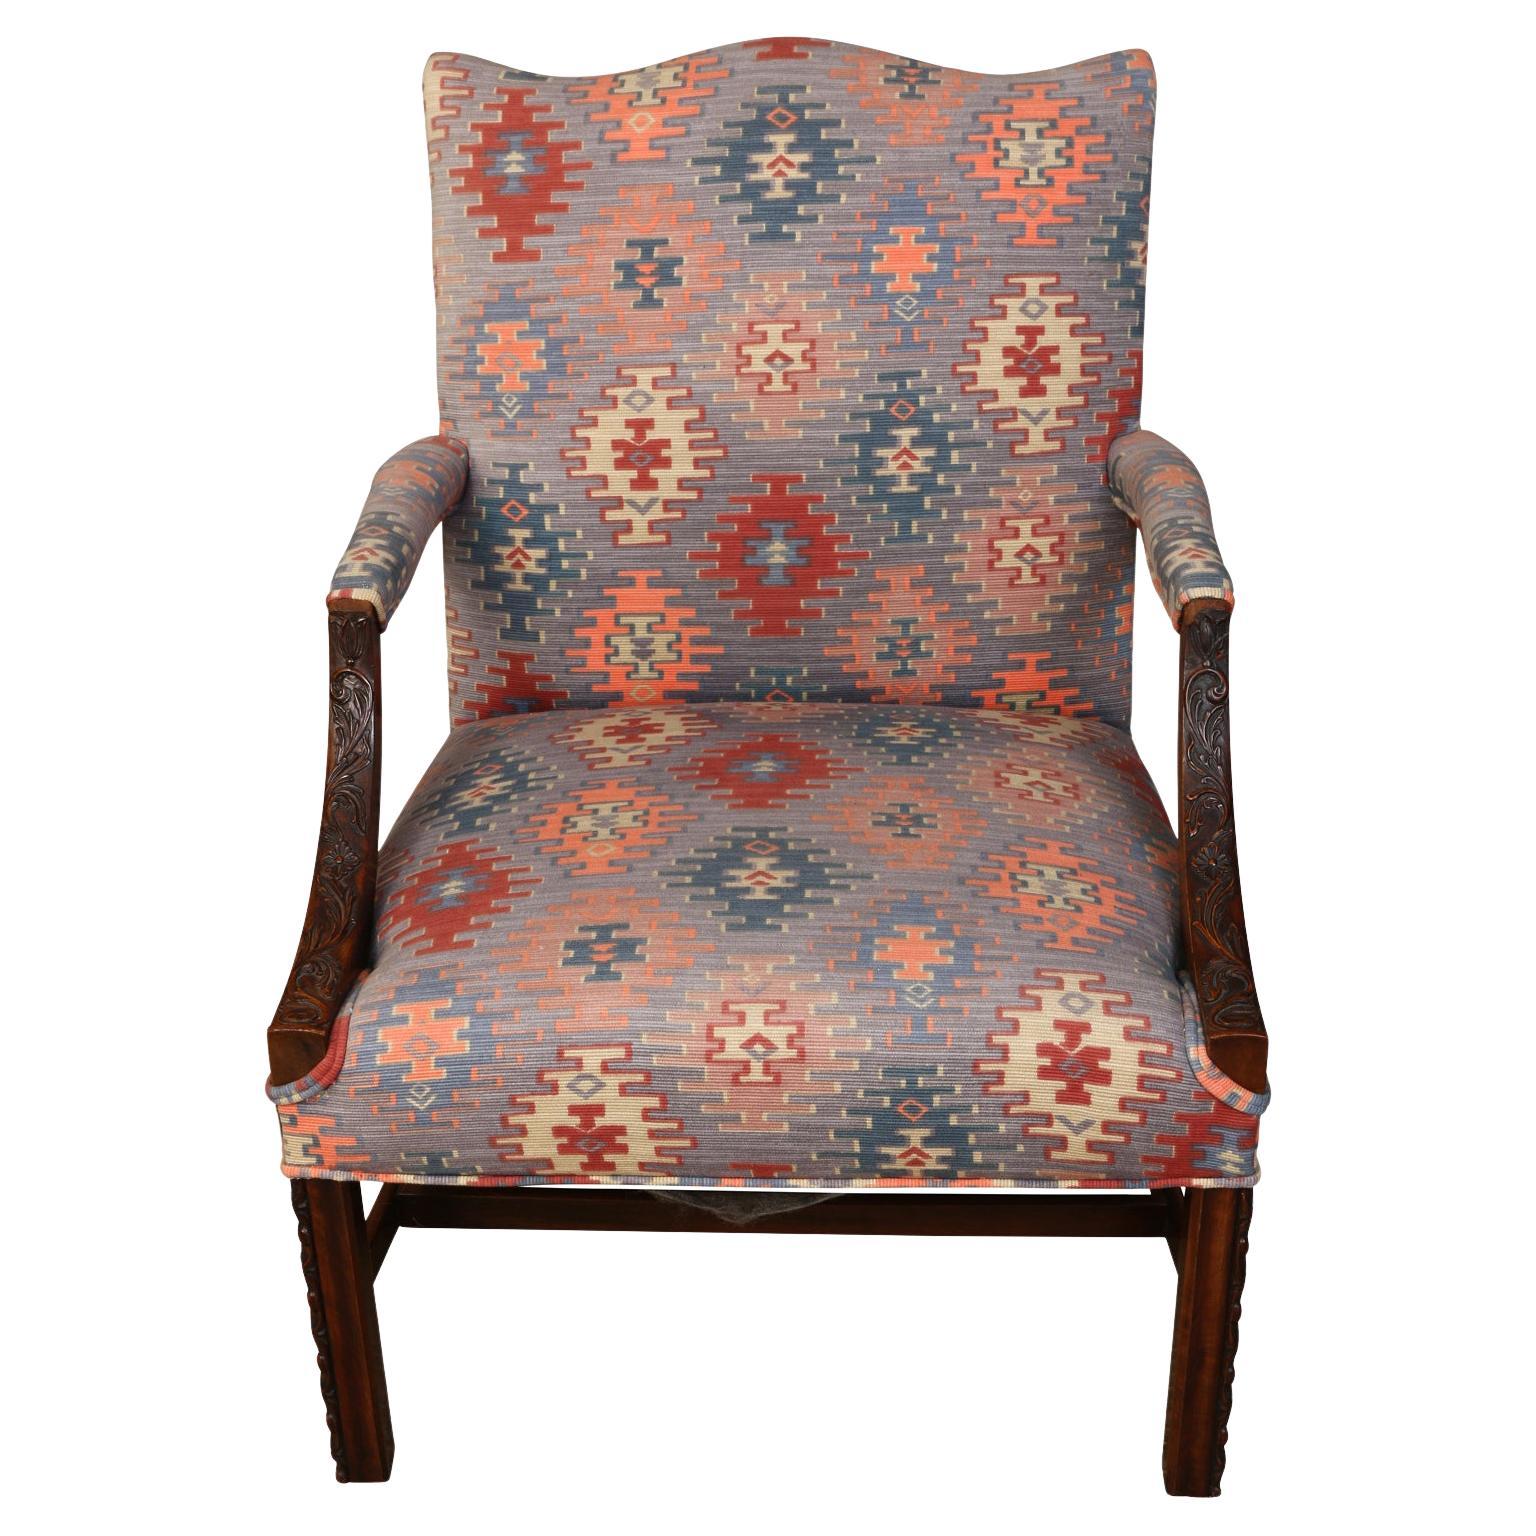 Vintage Carved Mahogany Library Chair in Ikat Kilim Fabric